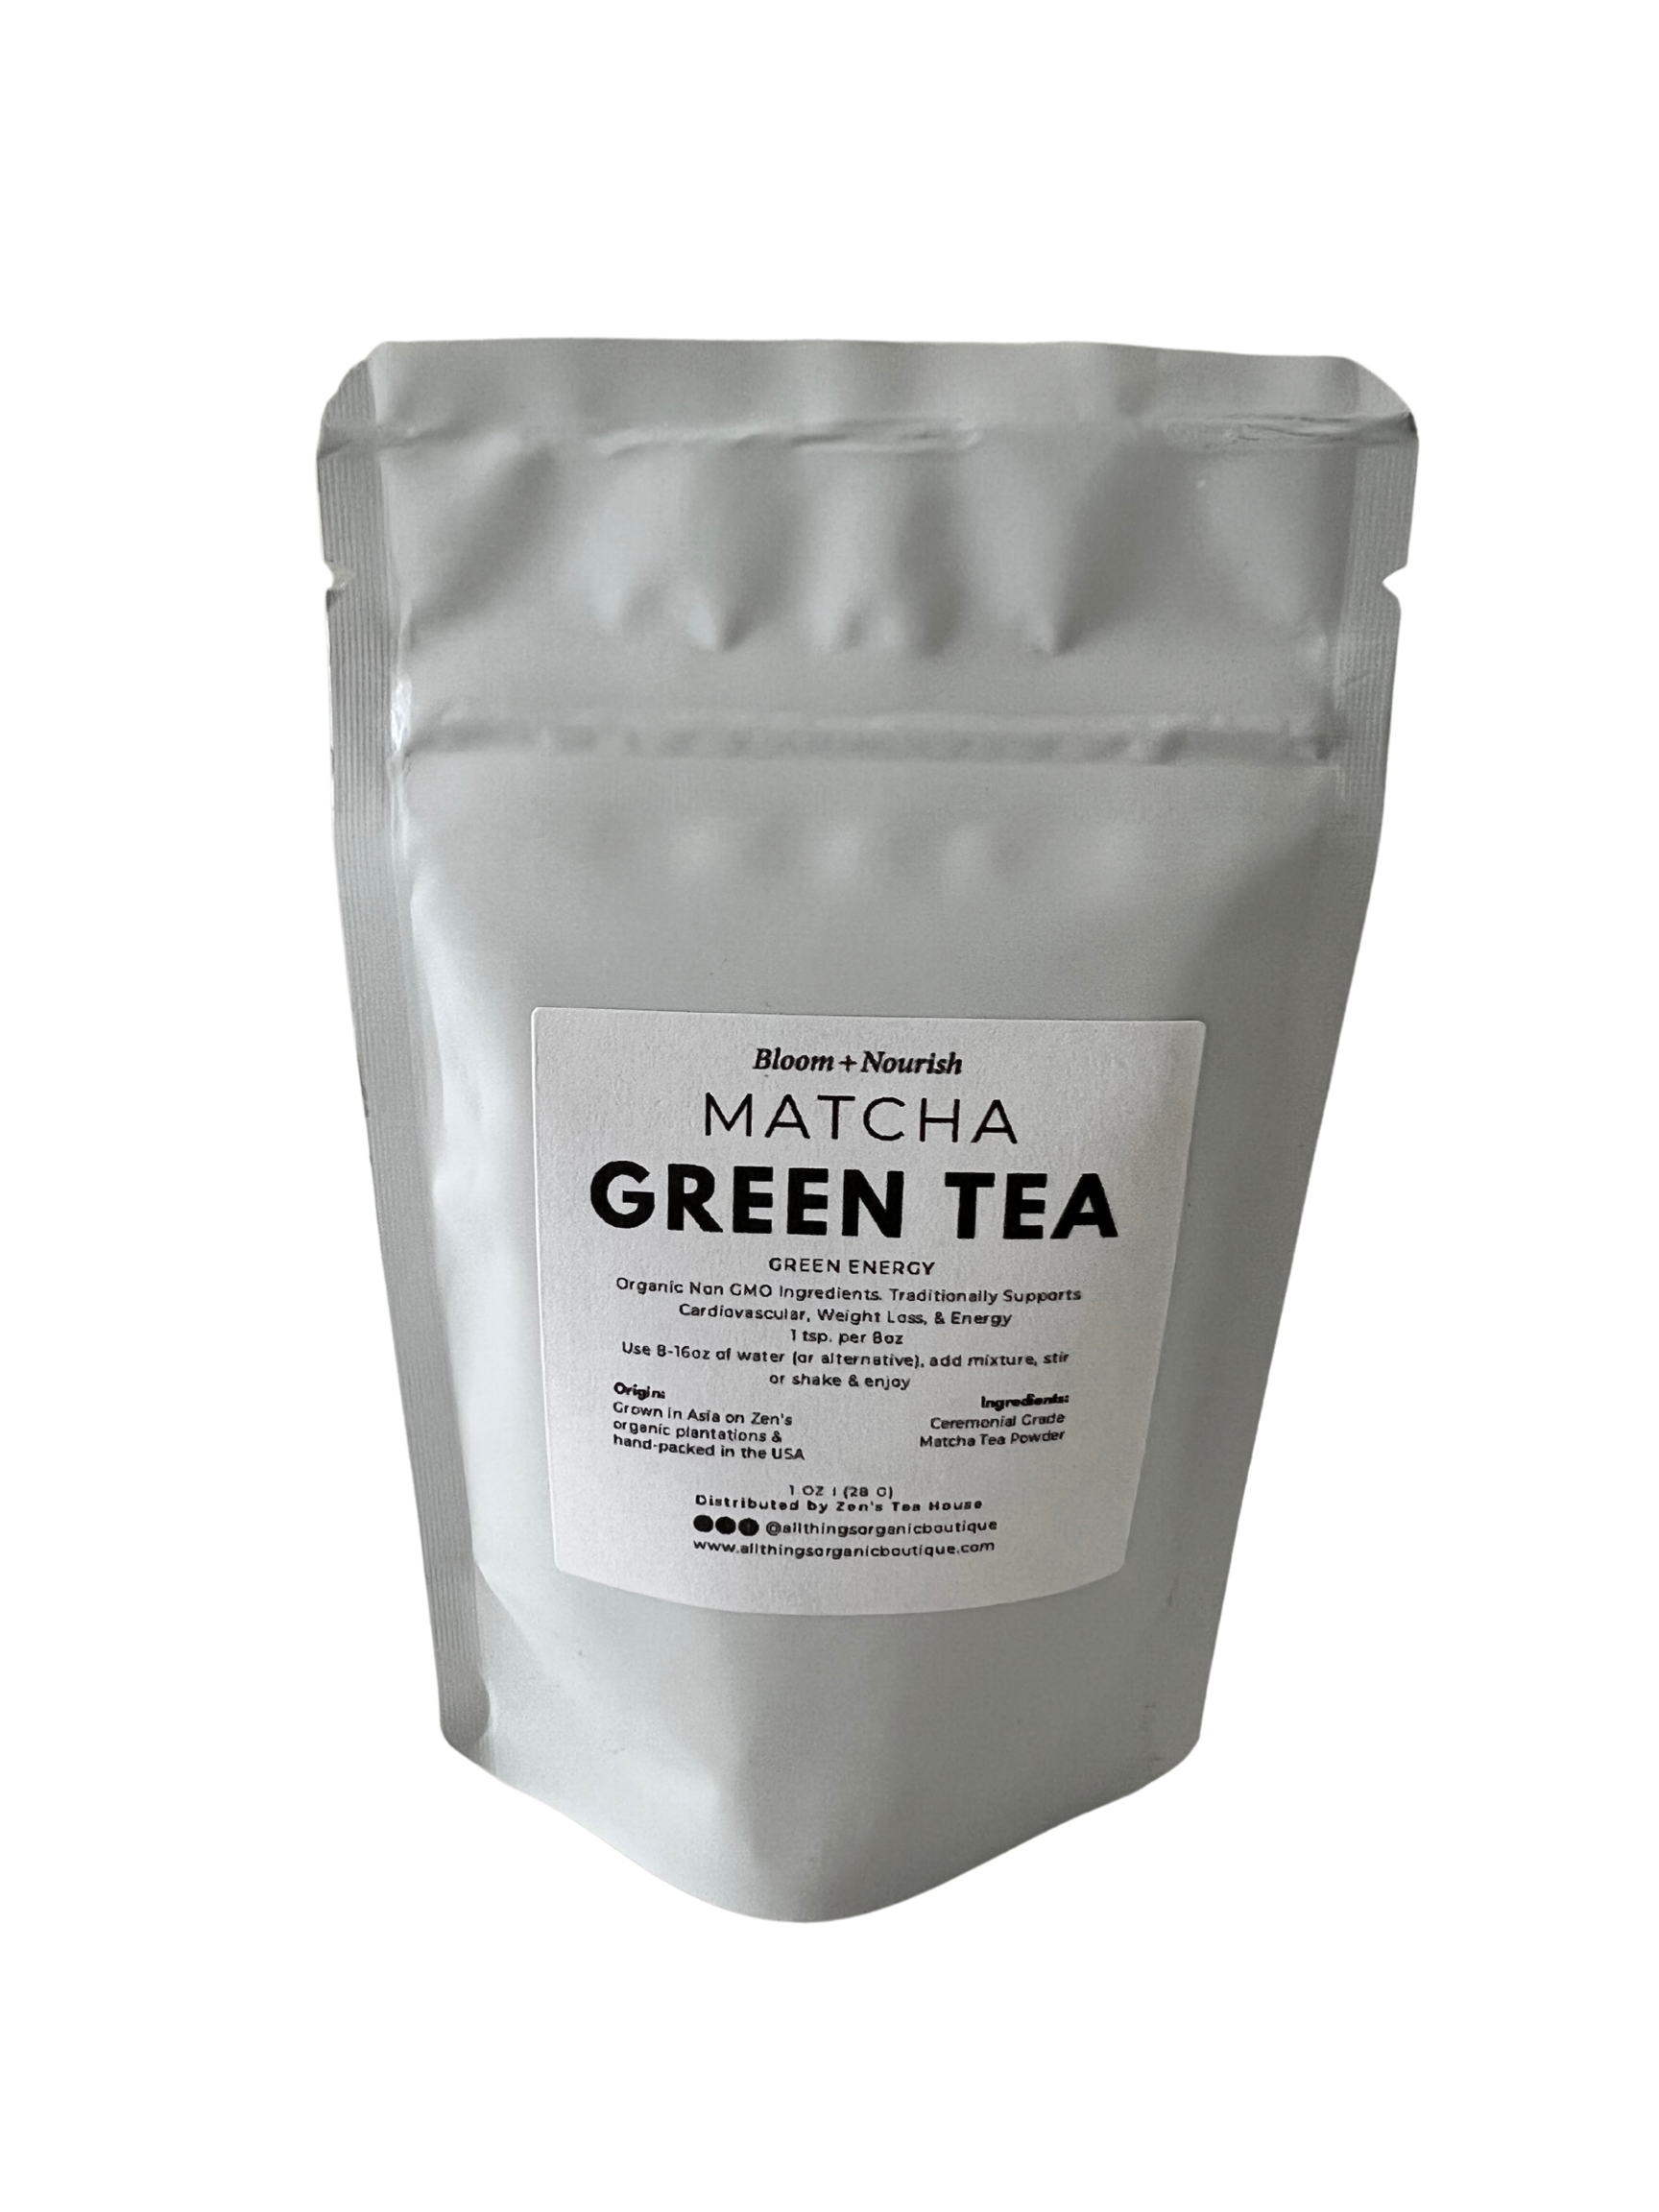 Organic Matcha Green Tea has many health benefits. Matcha is an Organic Premium Japanese green tea powder and is 100% organic. Matcha concentration of the epigallocatechin gallate (EGCG) catechin is 3 times higher than the largest literature value for other Green Tea